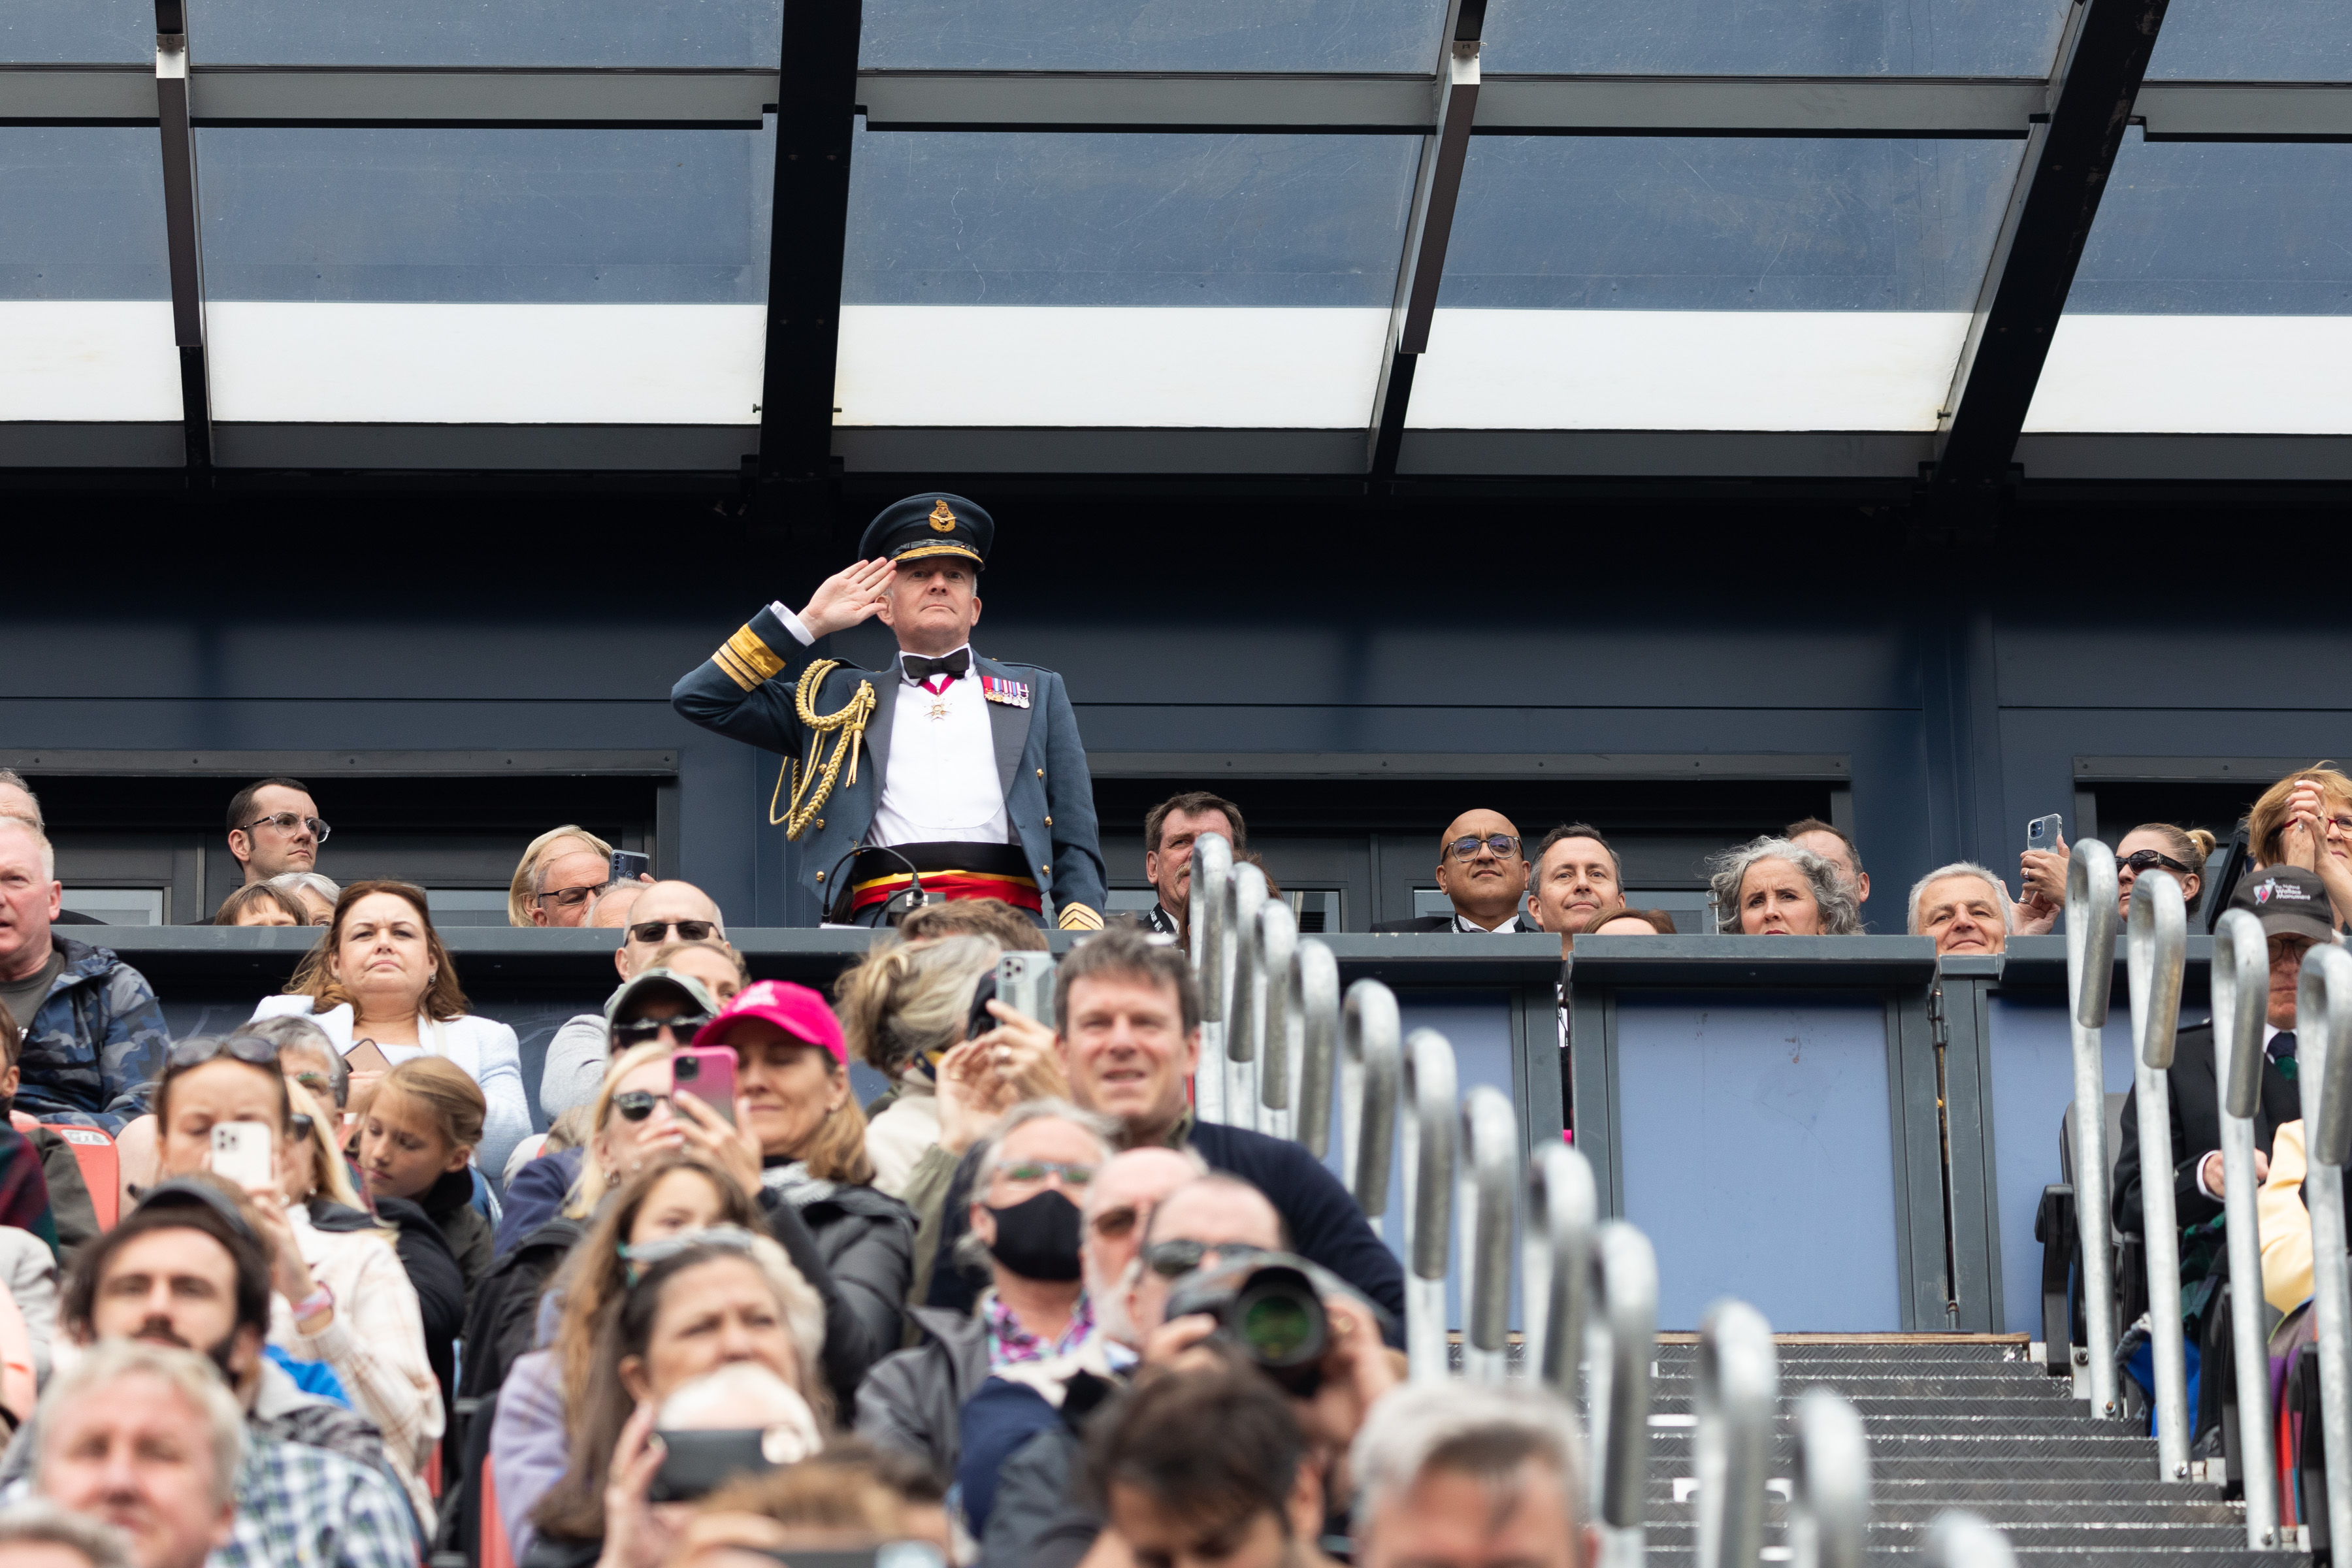 Image shows RAF aviator saluting from seating area amid public crowd.